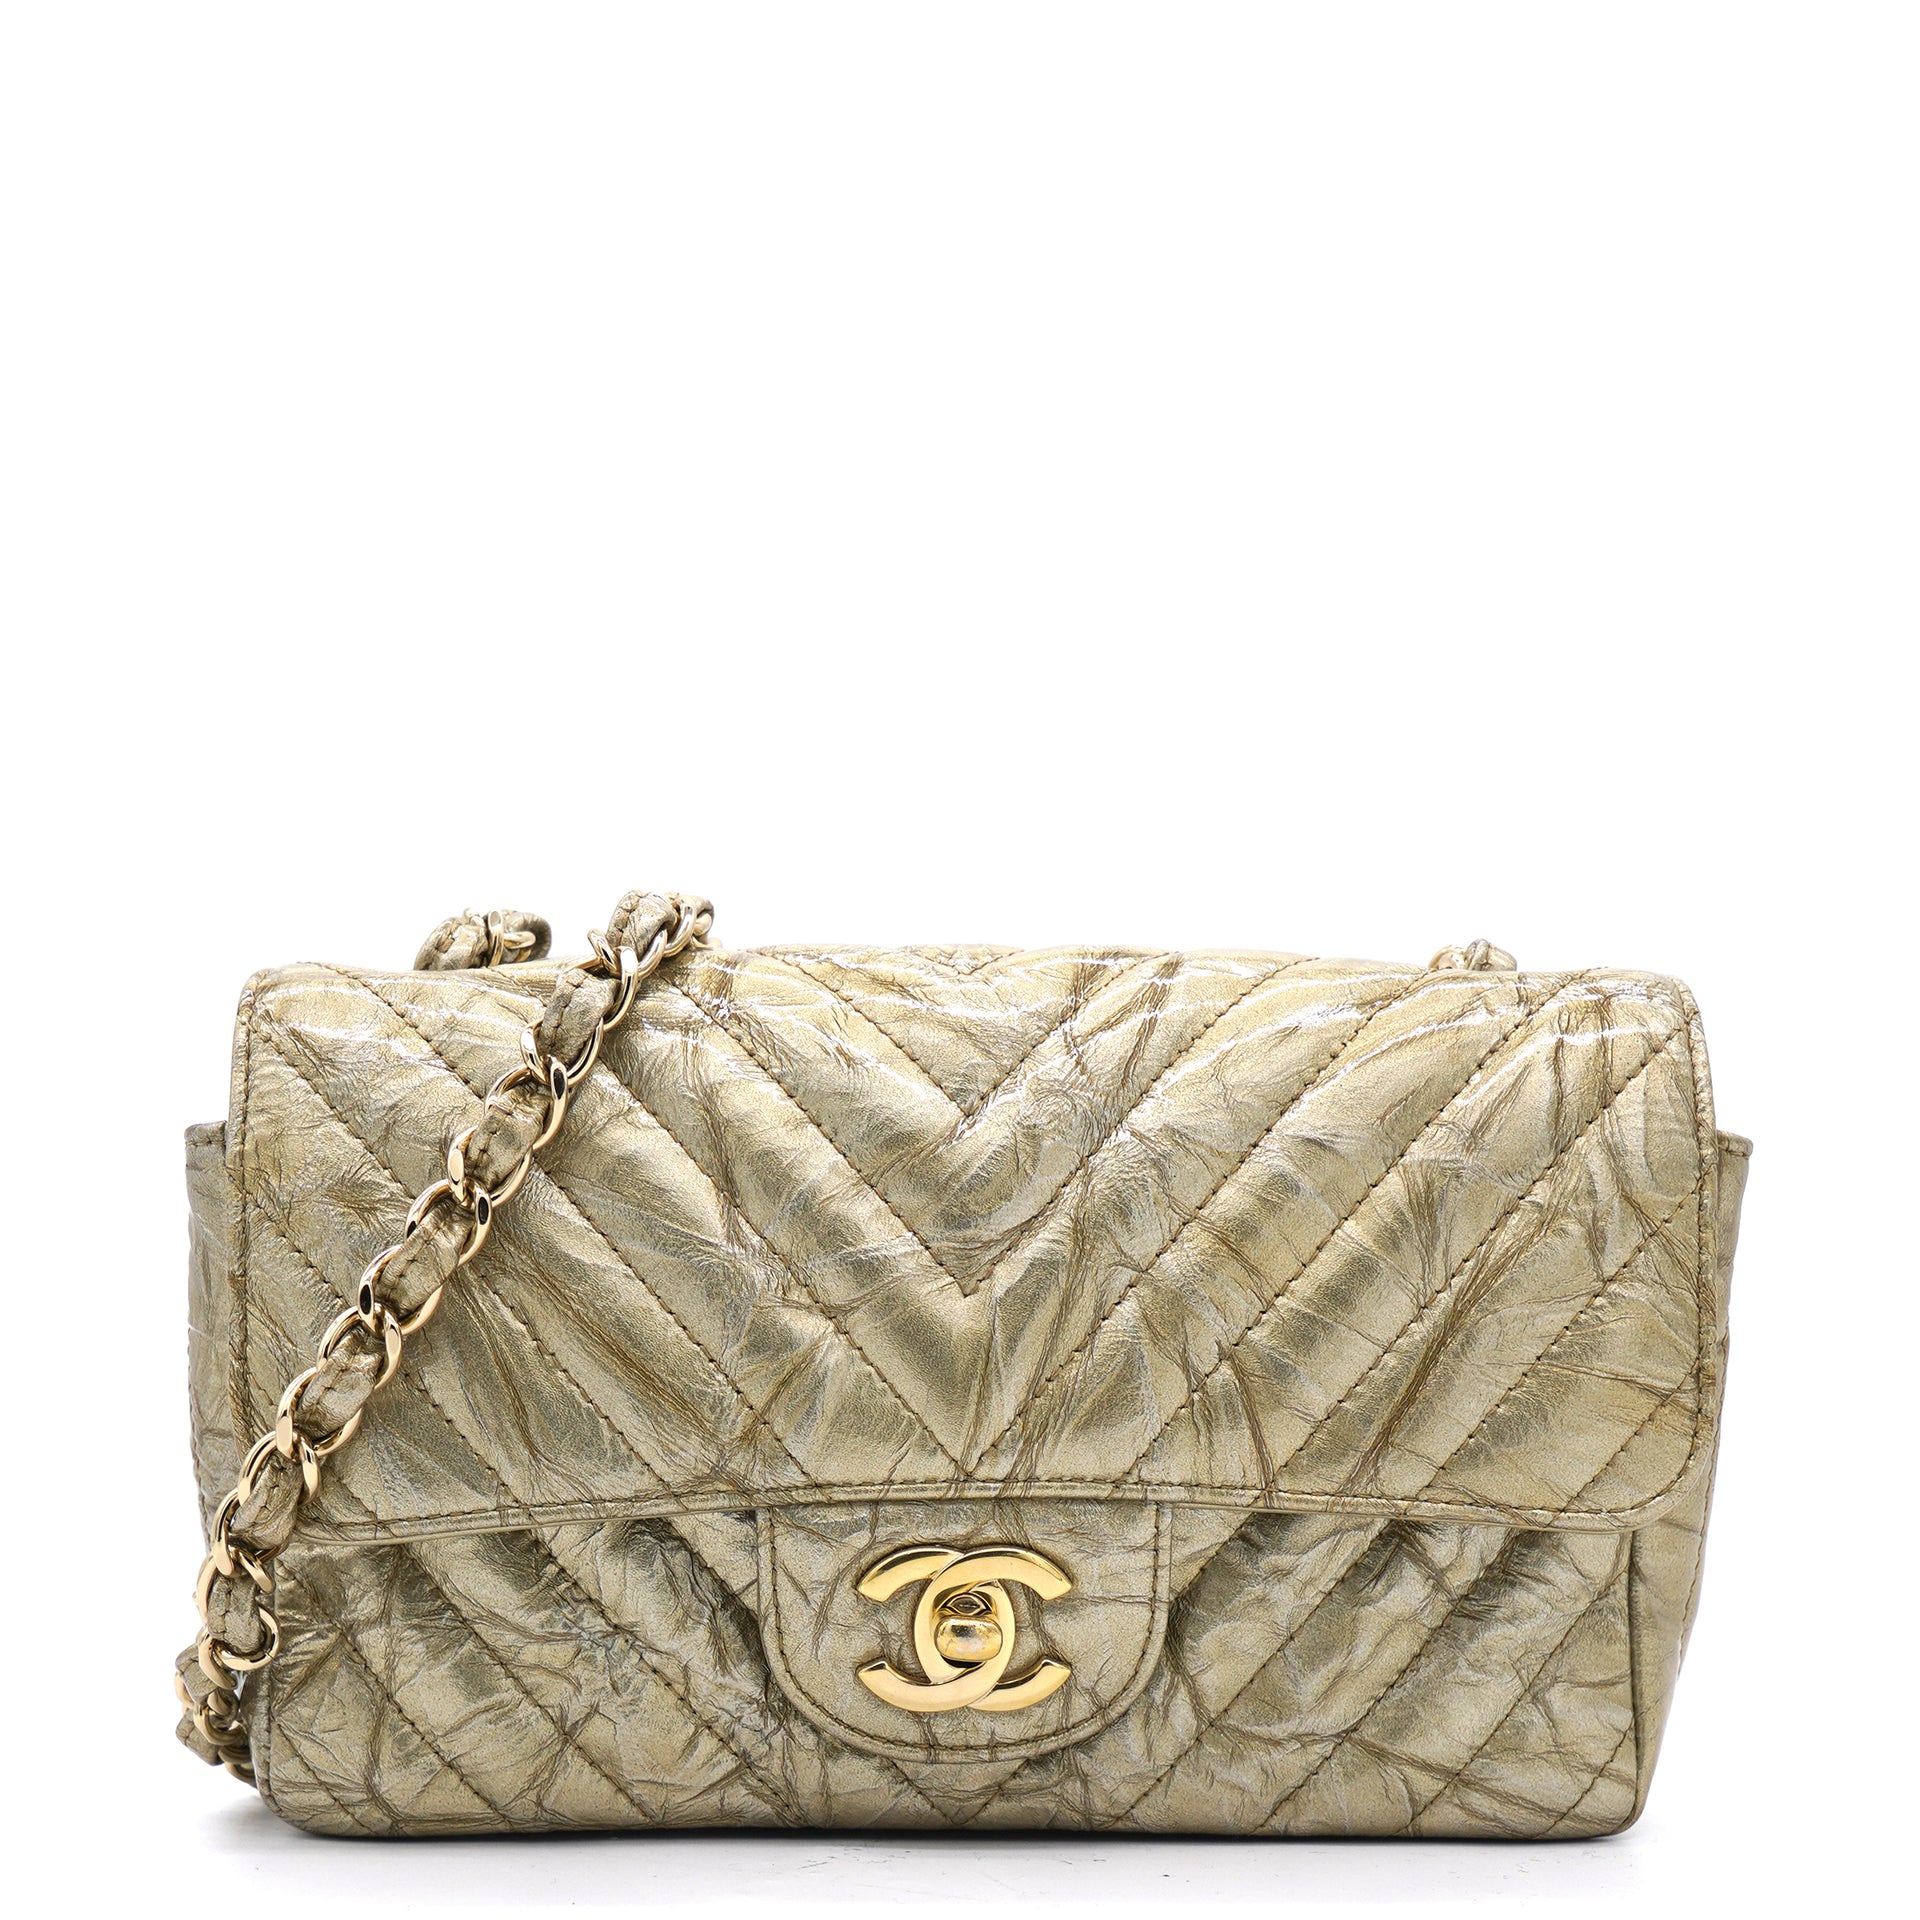 Authentic Second Hand Chanel Patent Single Flap Bag PSS51500011  THE  FIFTH COLLECTION